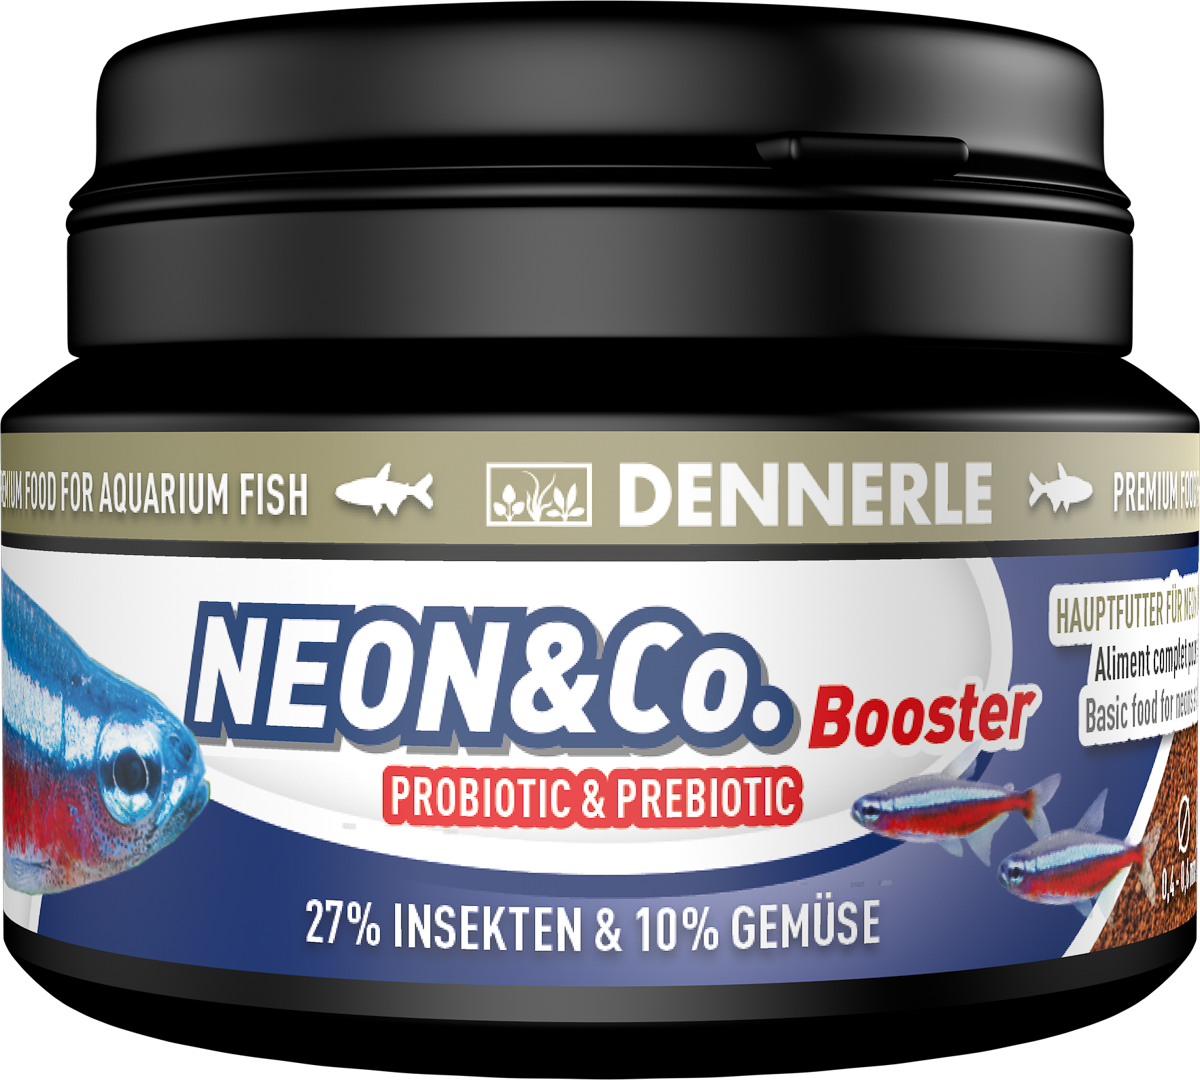 Dennerle Neon & Co Booster 100ML